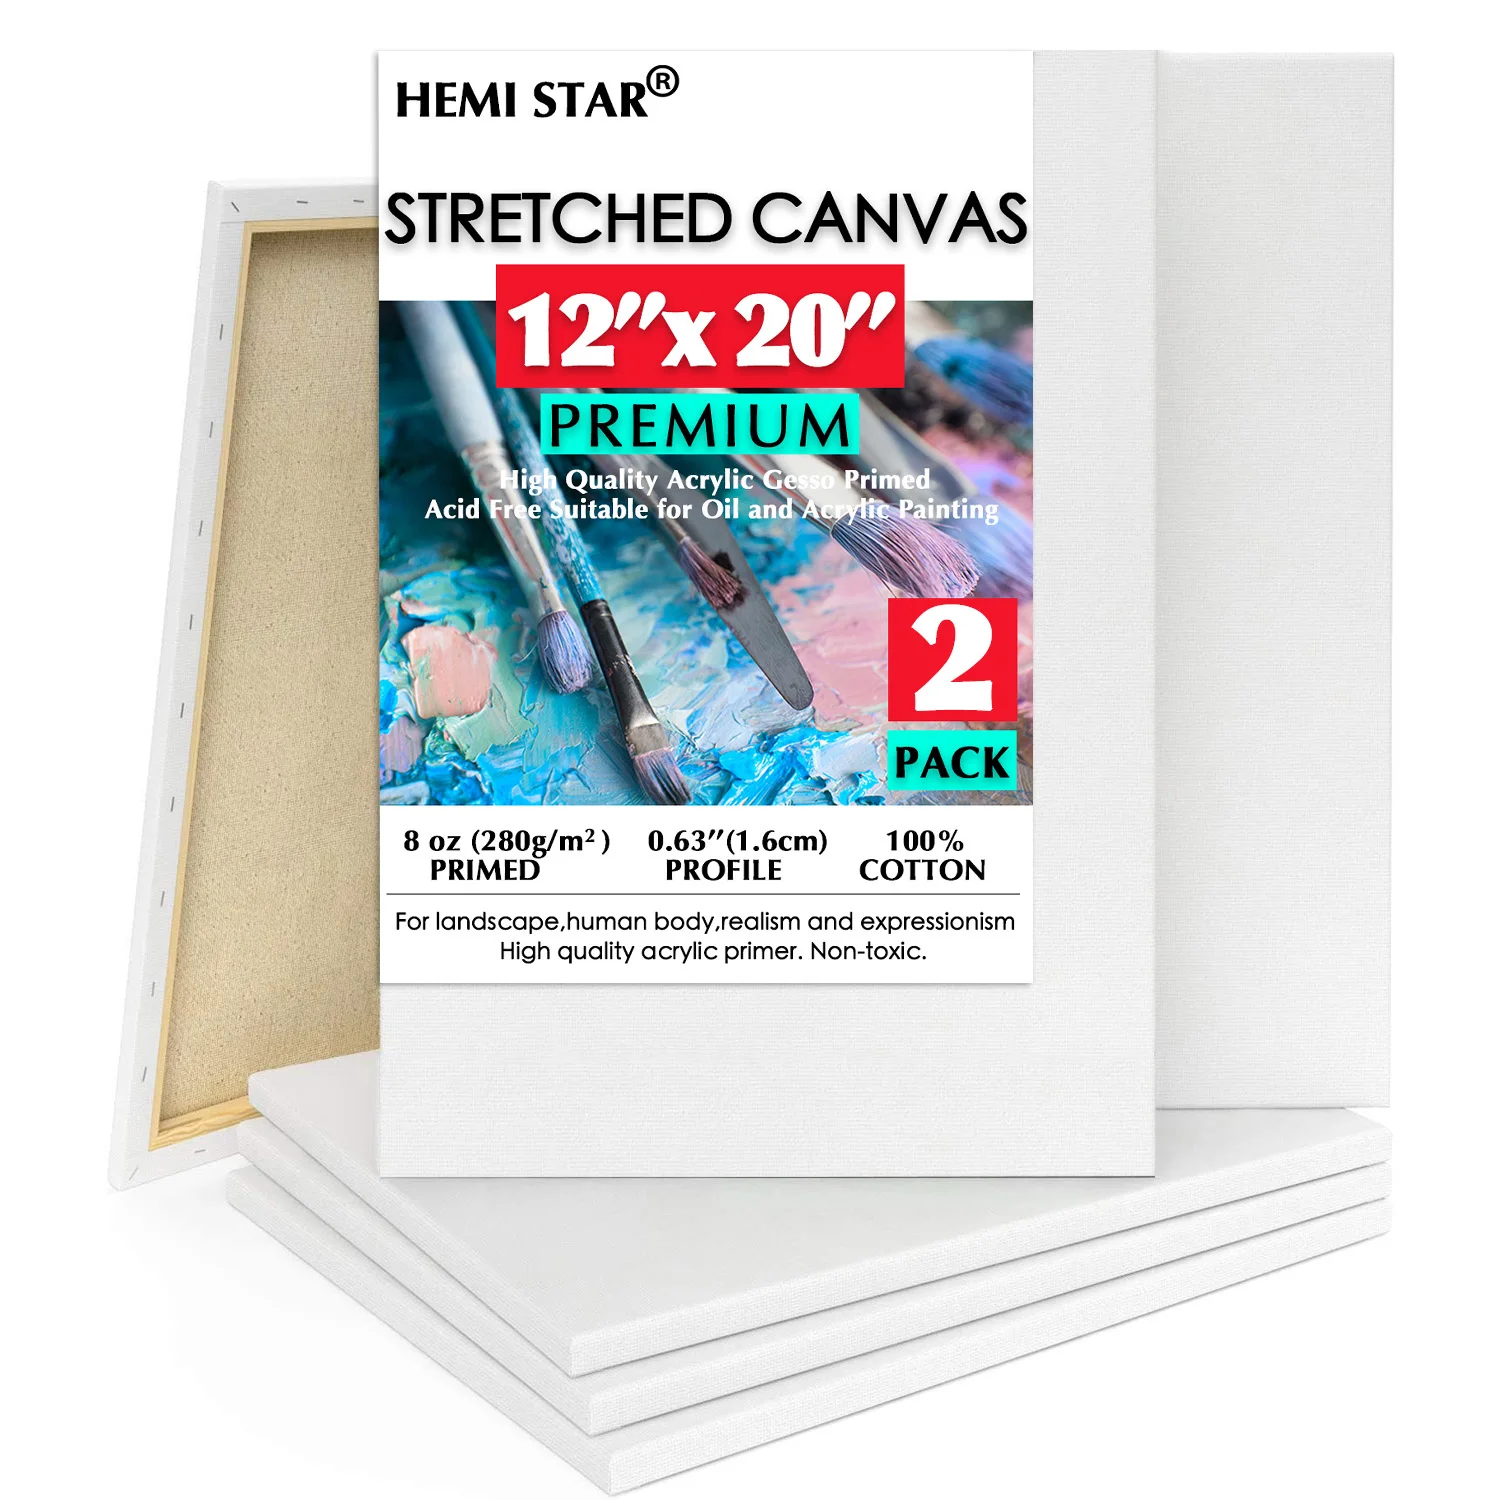 

2 pcs Stretched Canvas for Paint 30x50cm,12x20 inch Primed White 100% Cotton Blank Canvas Boards for Painting 8 oz Gesso-Primed